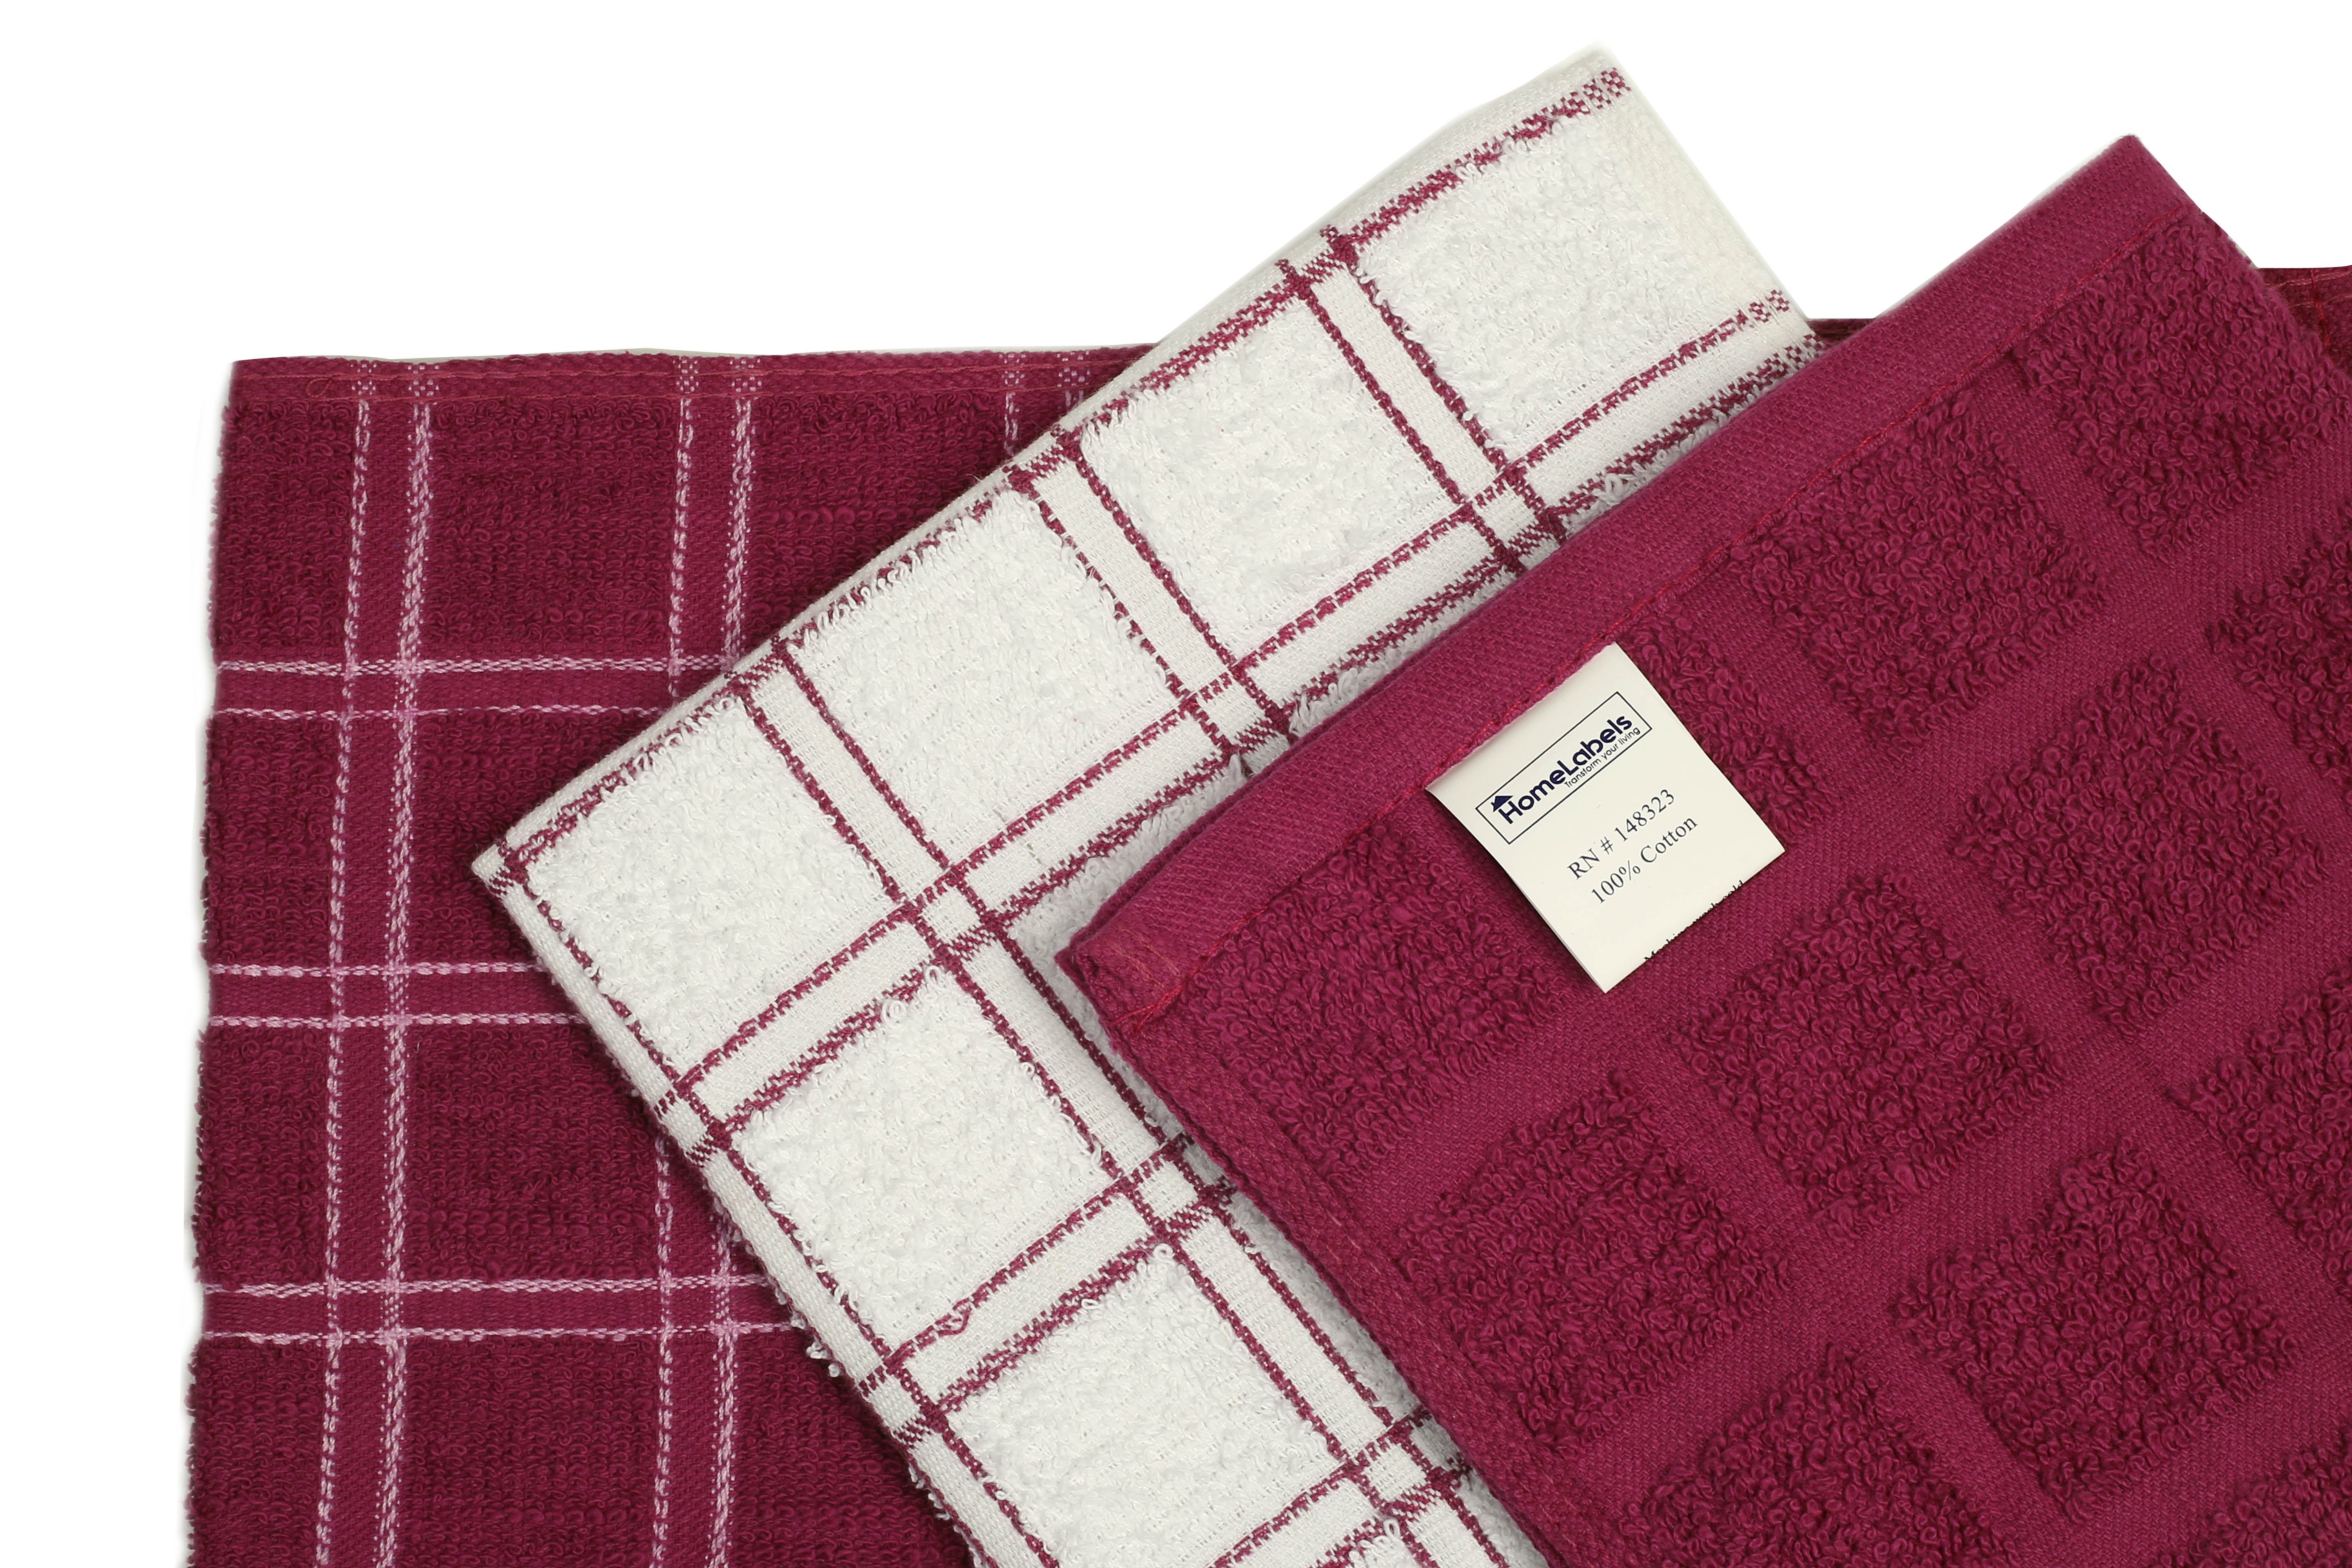 Home Labels Classic Kitchen Towel 12 Pack, 15 x 25 Inches, 100% Ring Spun Cotton Super Soft and Absorbent Linen Dish Towels, Tea Bar Set (Plum)